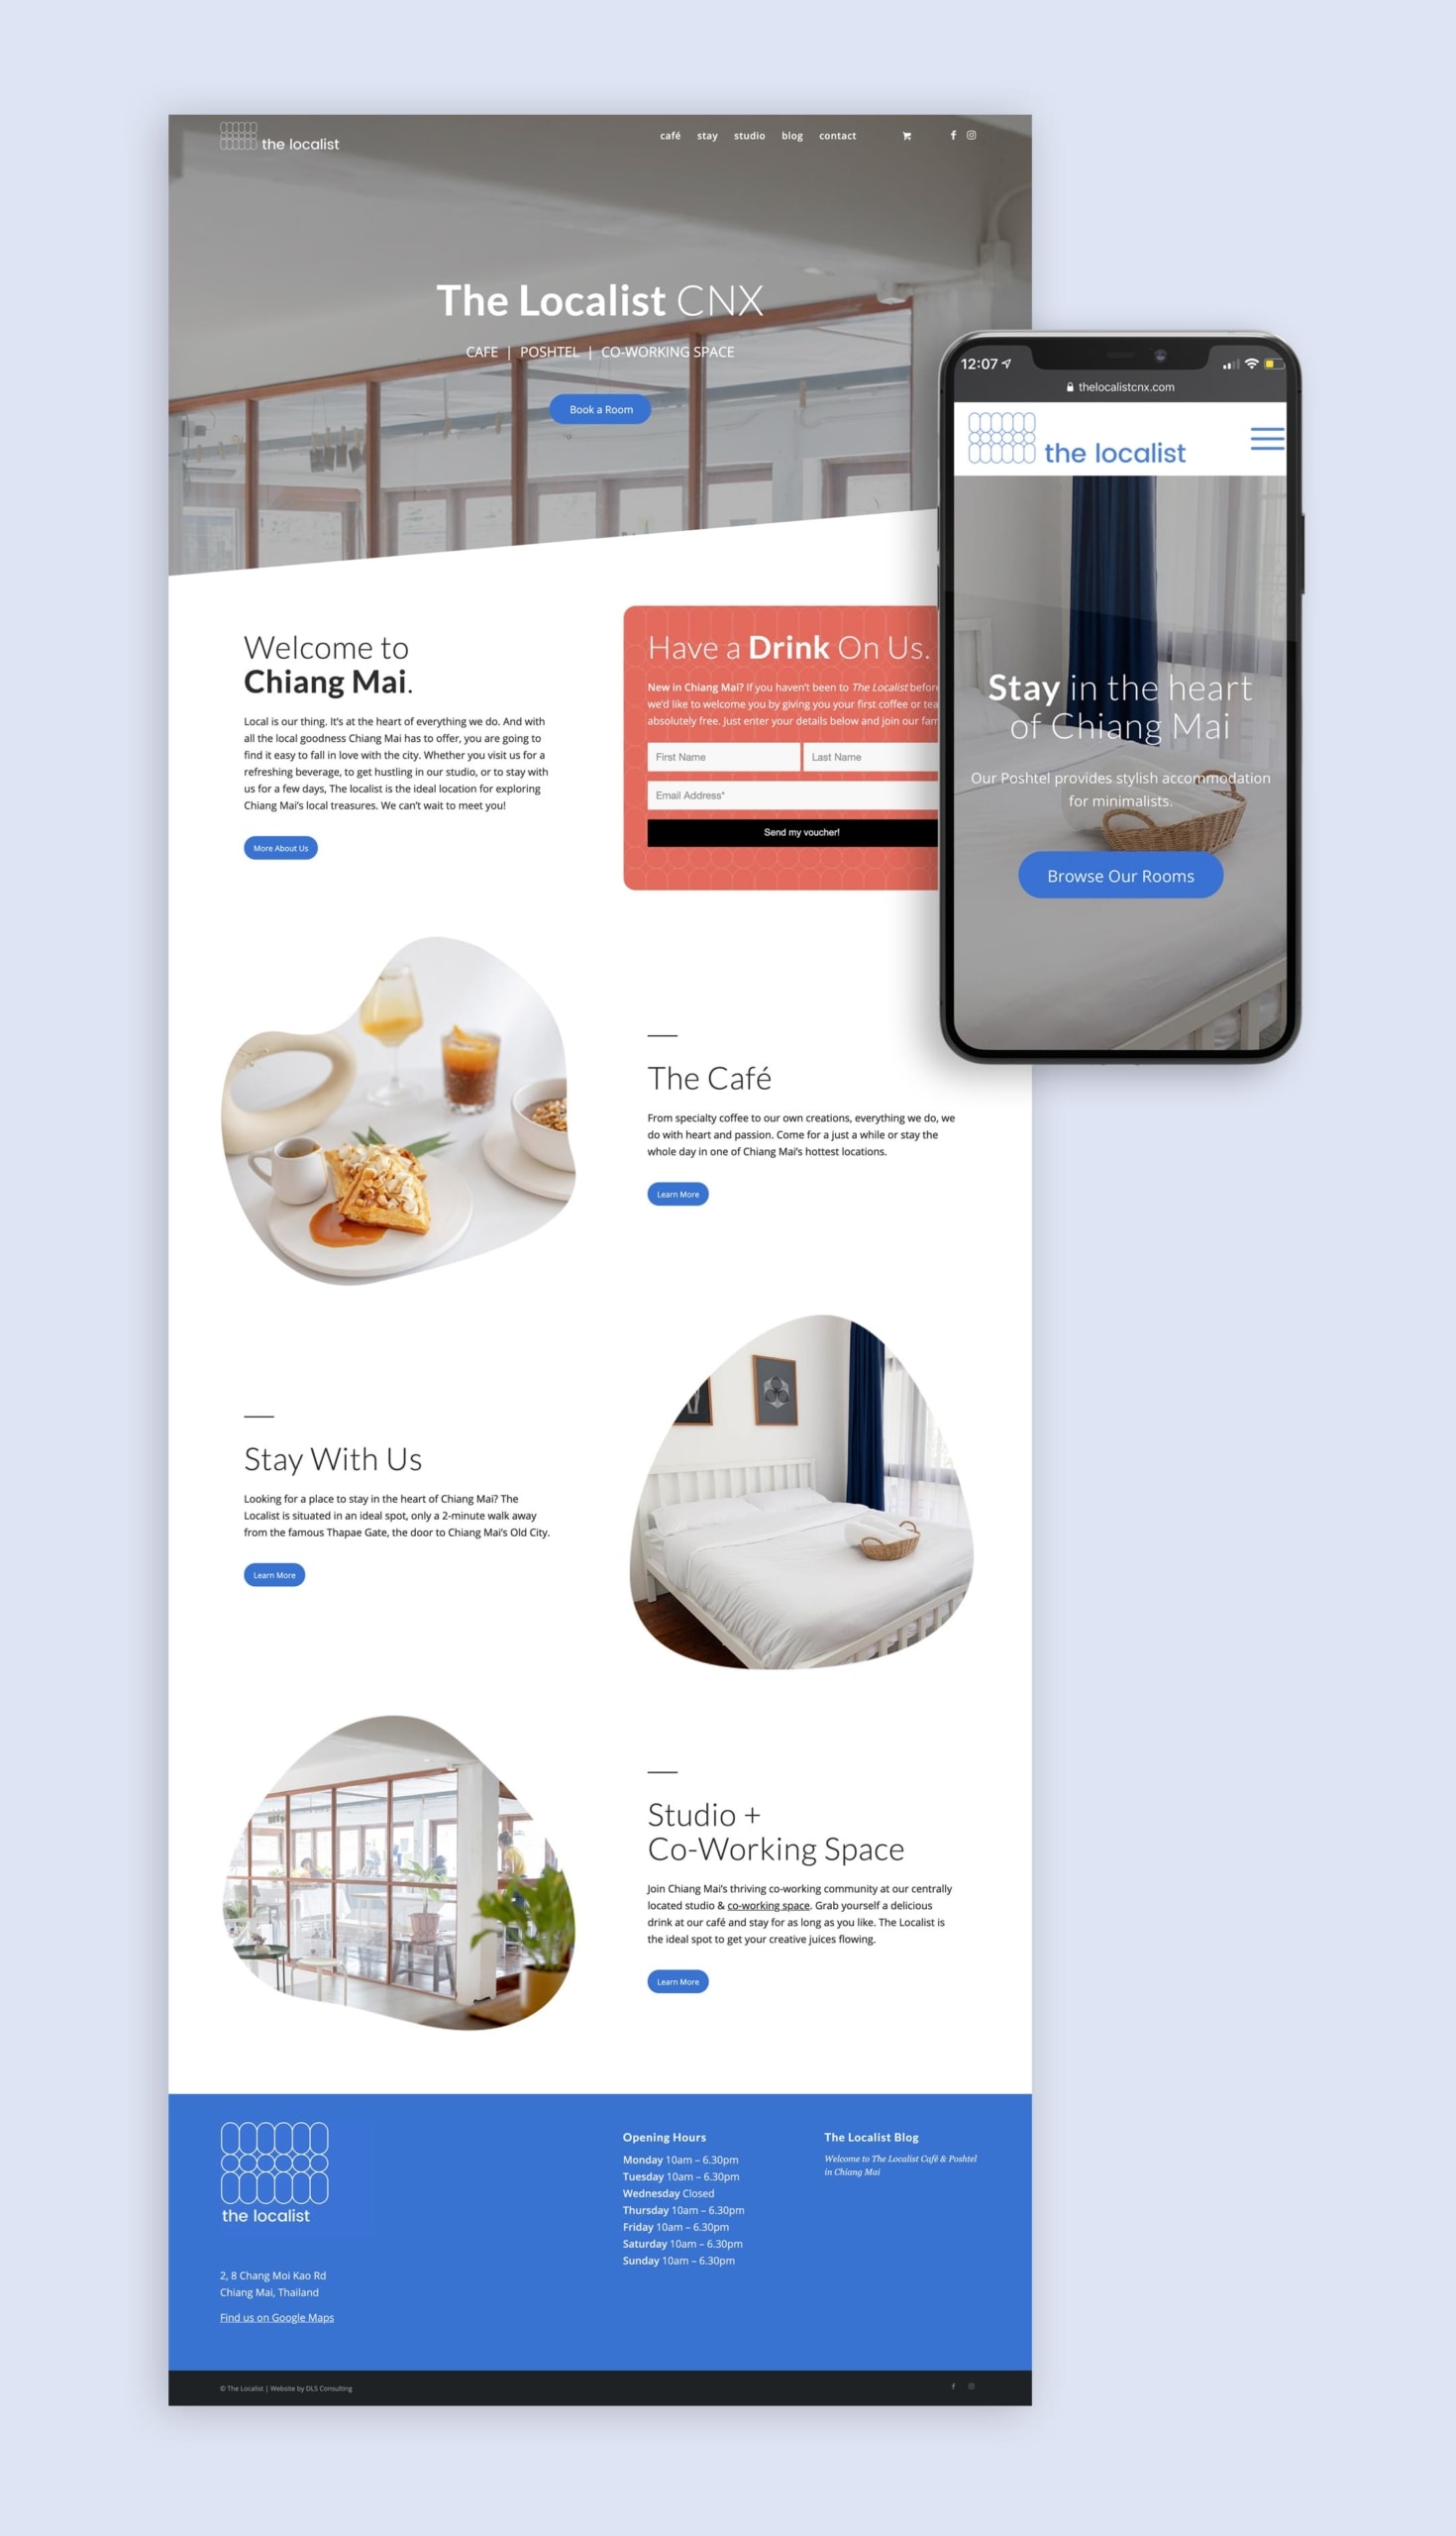 The Localist - Cafe & Co-working Space Website Design